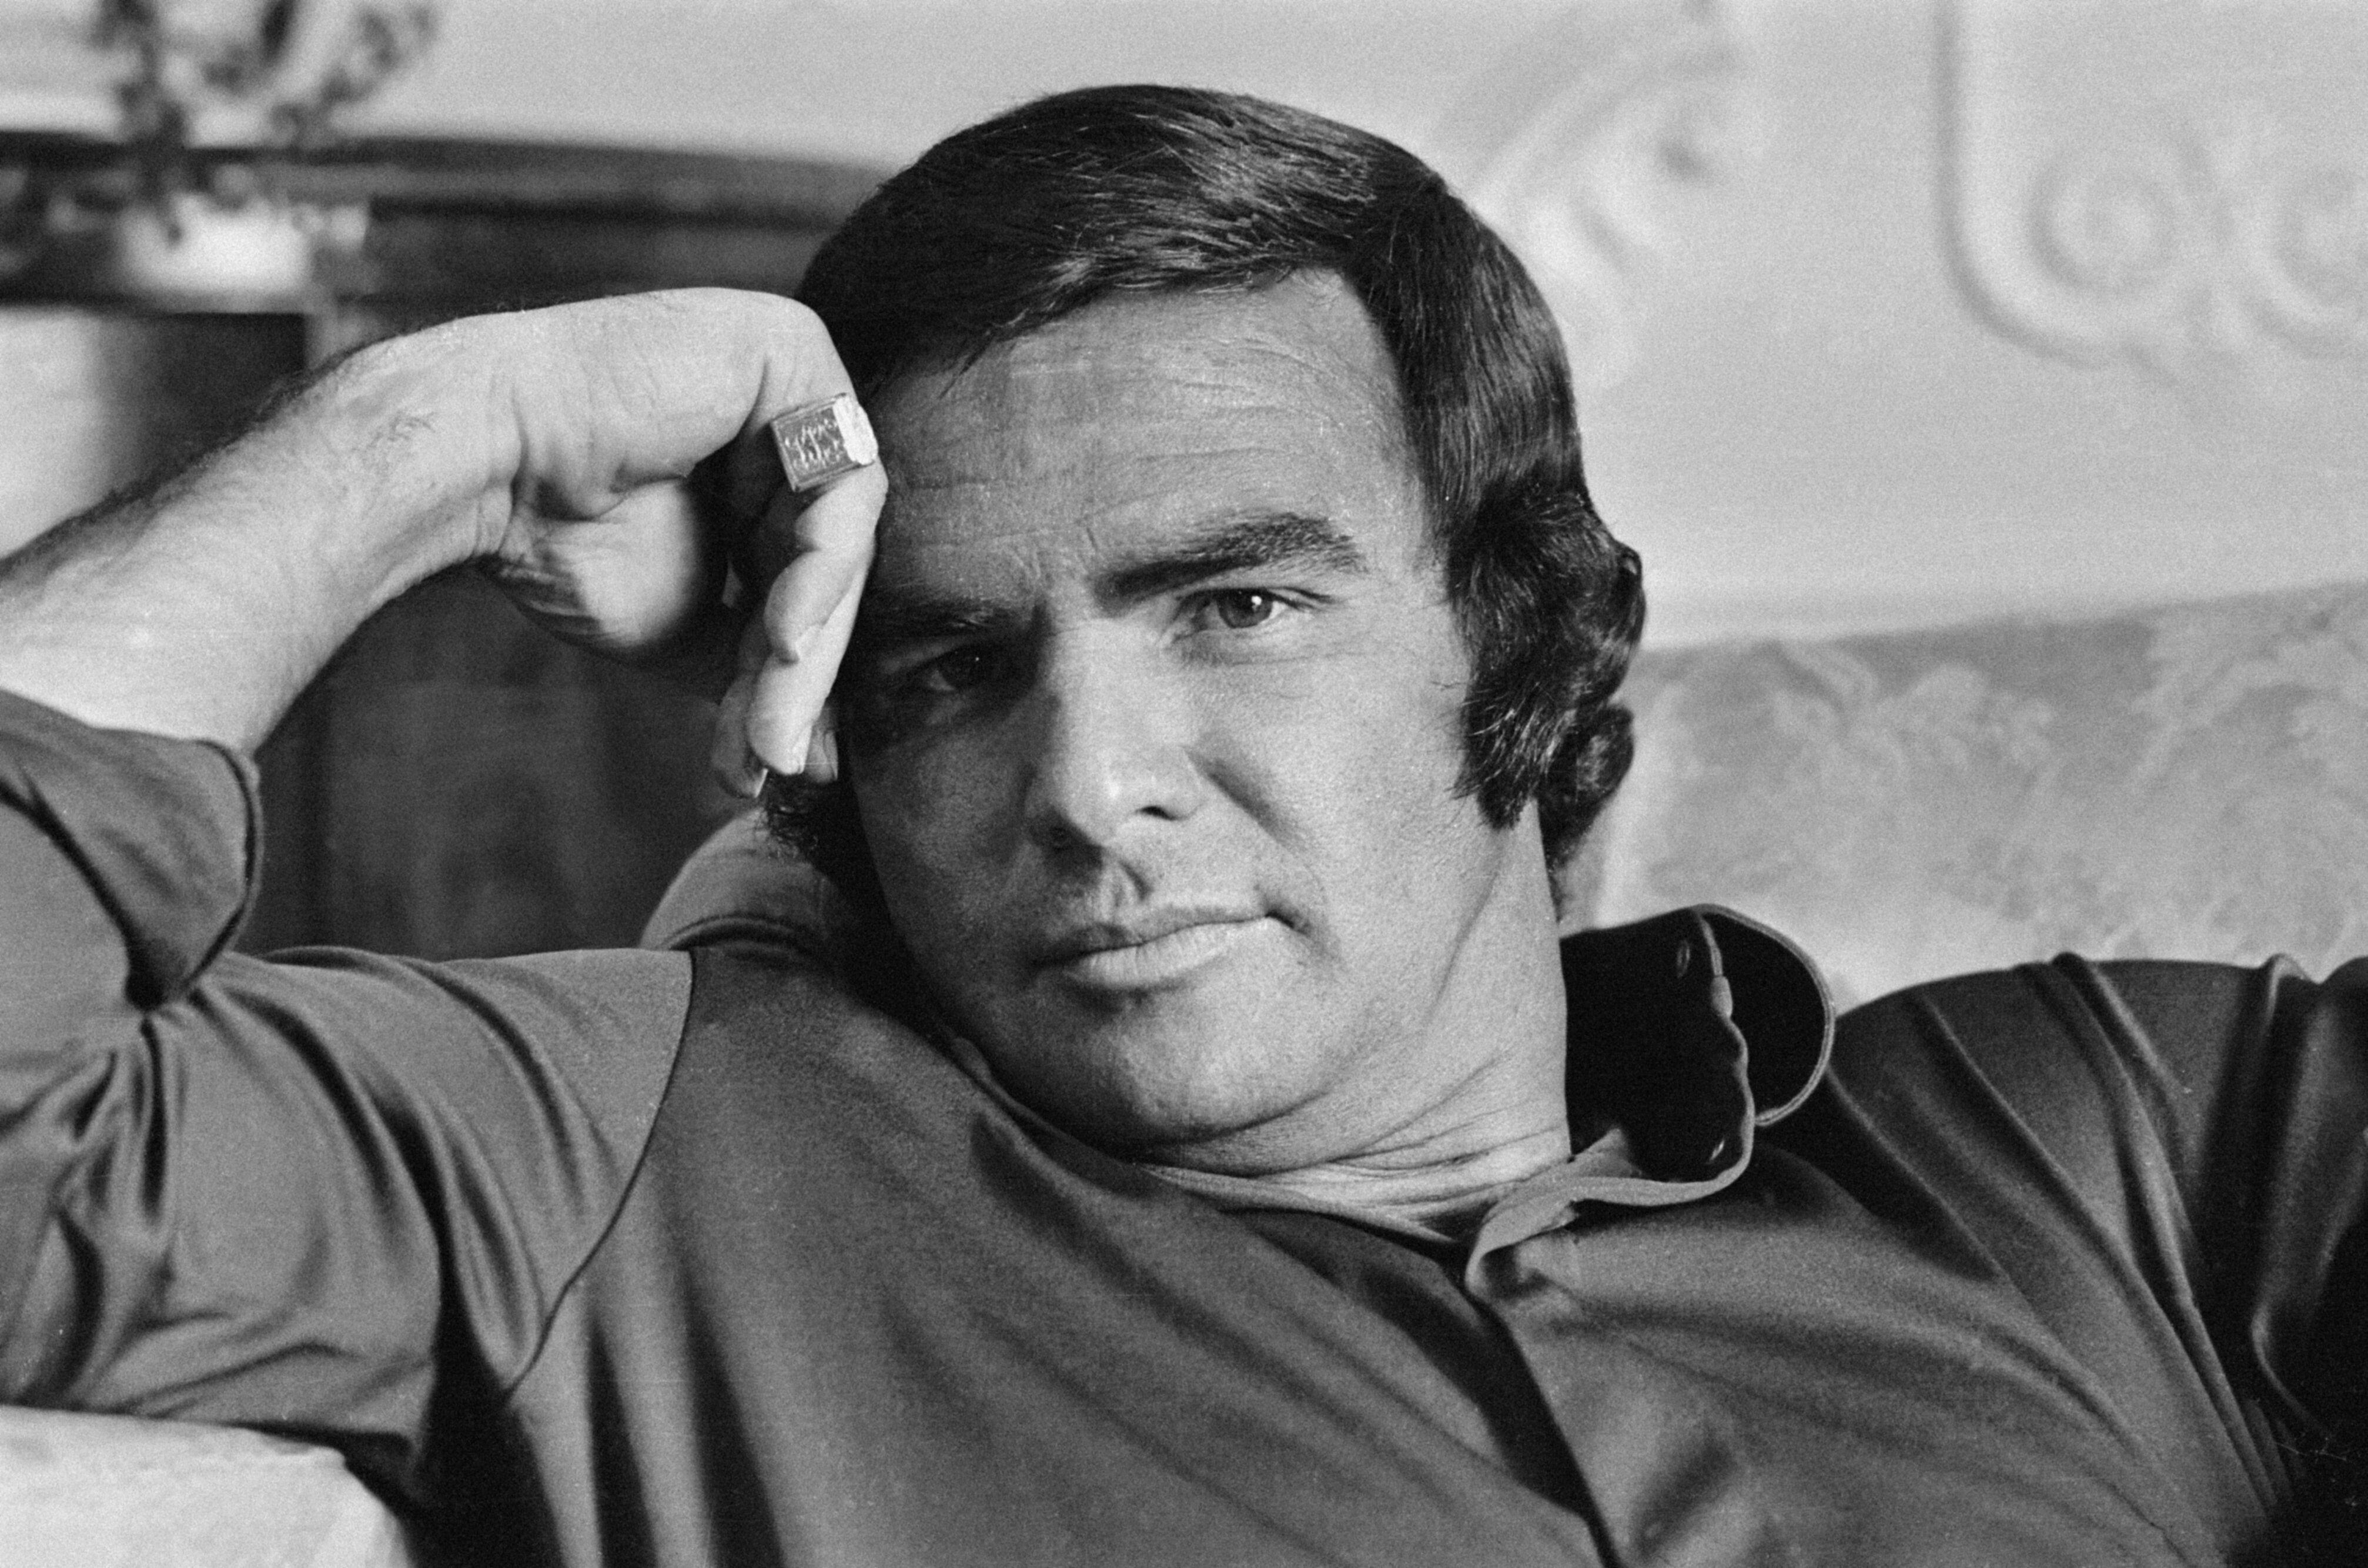 Burt Reynolds poses in 1972. | Source: Getty Images